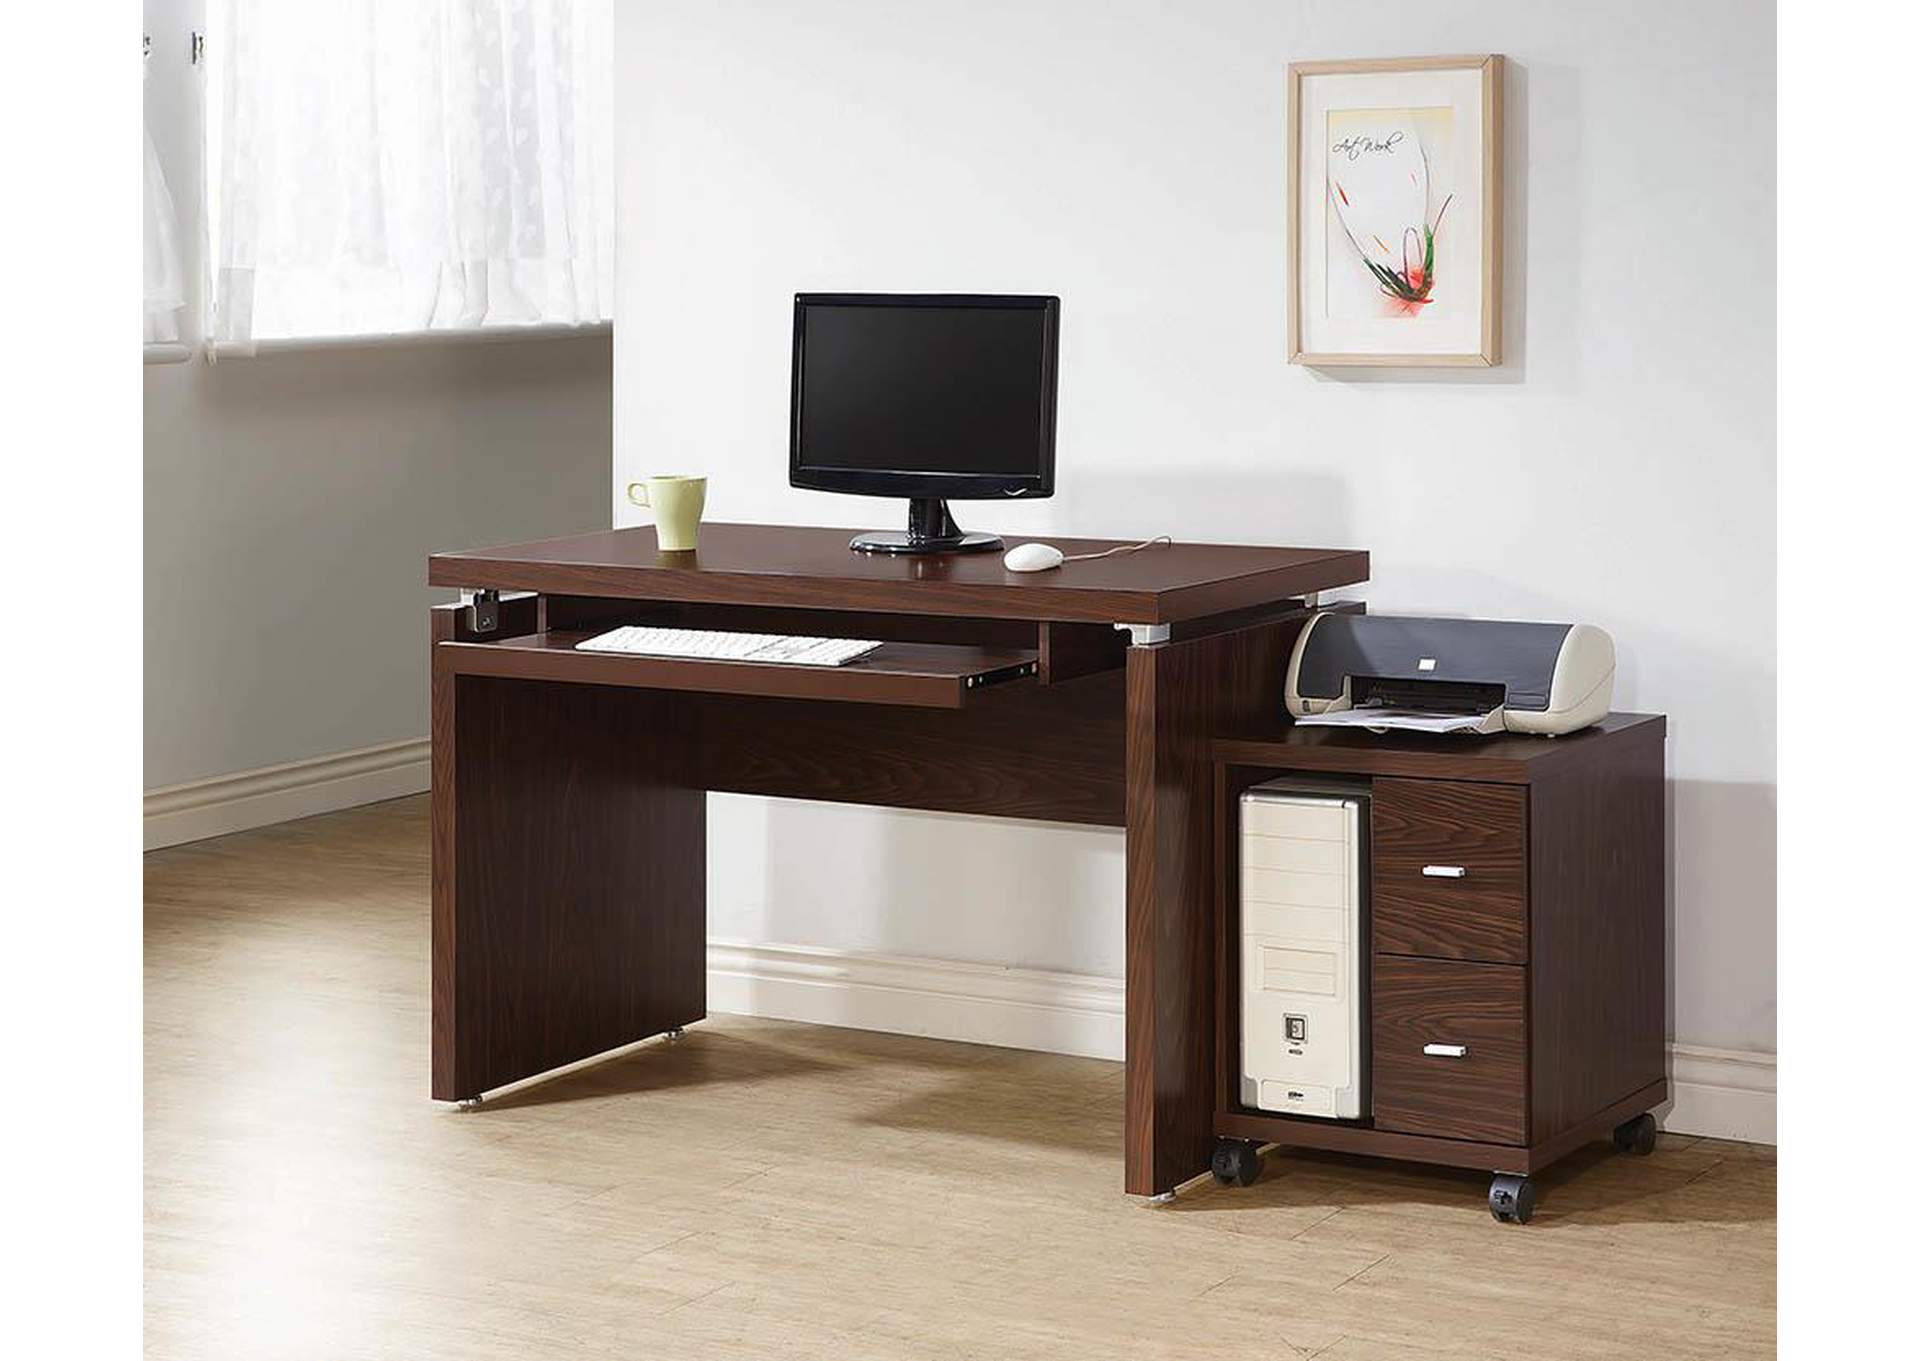 2 Drawer Computer Stand,ABF Coaster Furniture